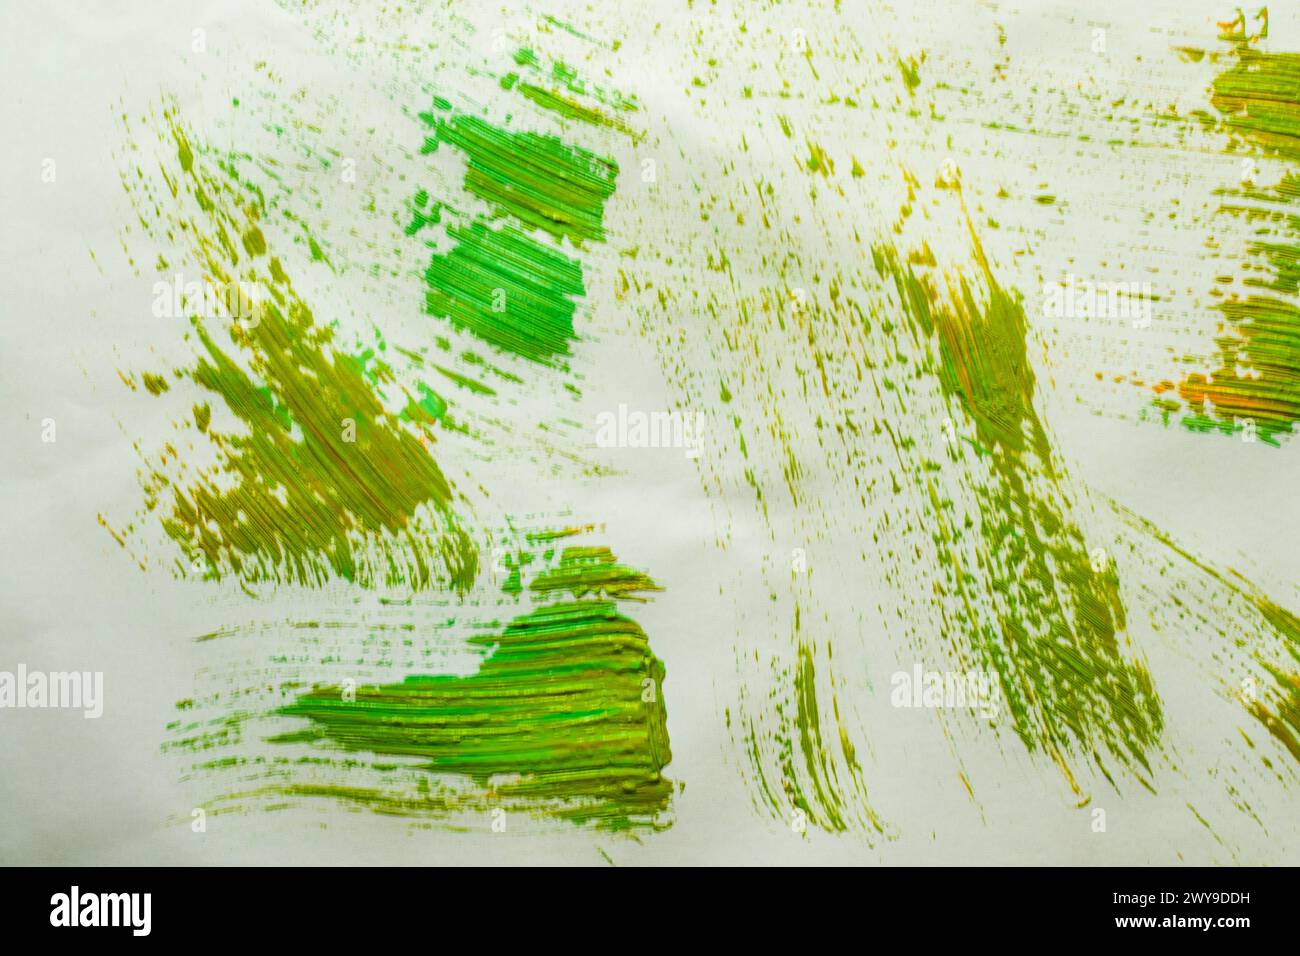 A Vibrant painting of green and yellow background Stock Photo